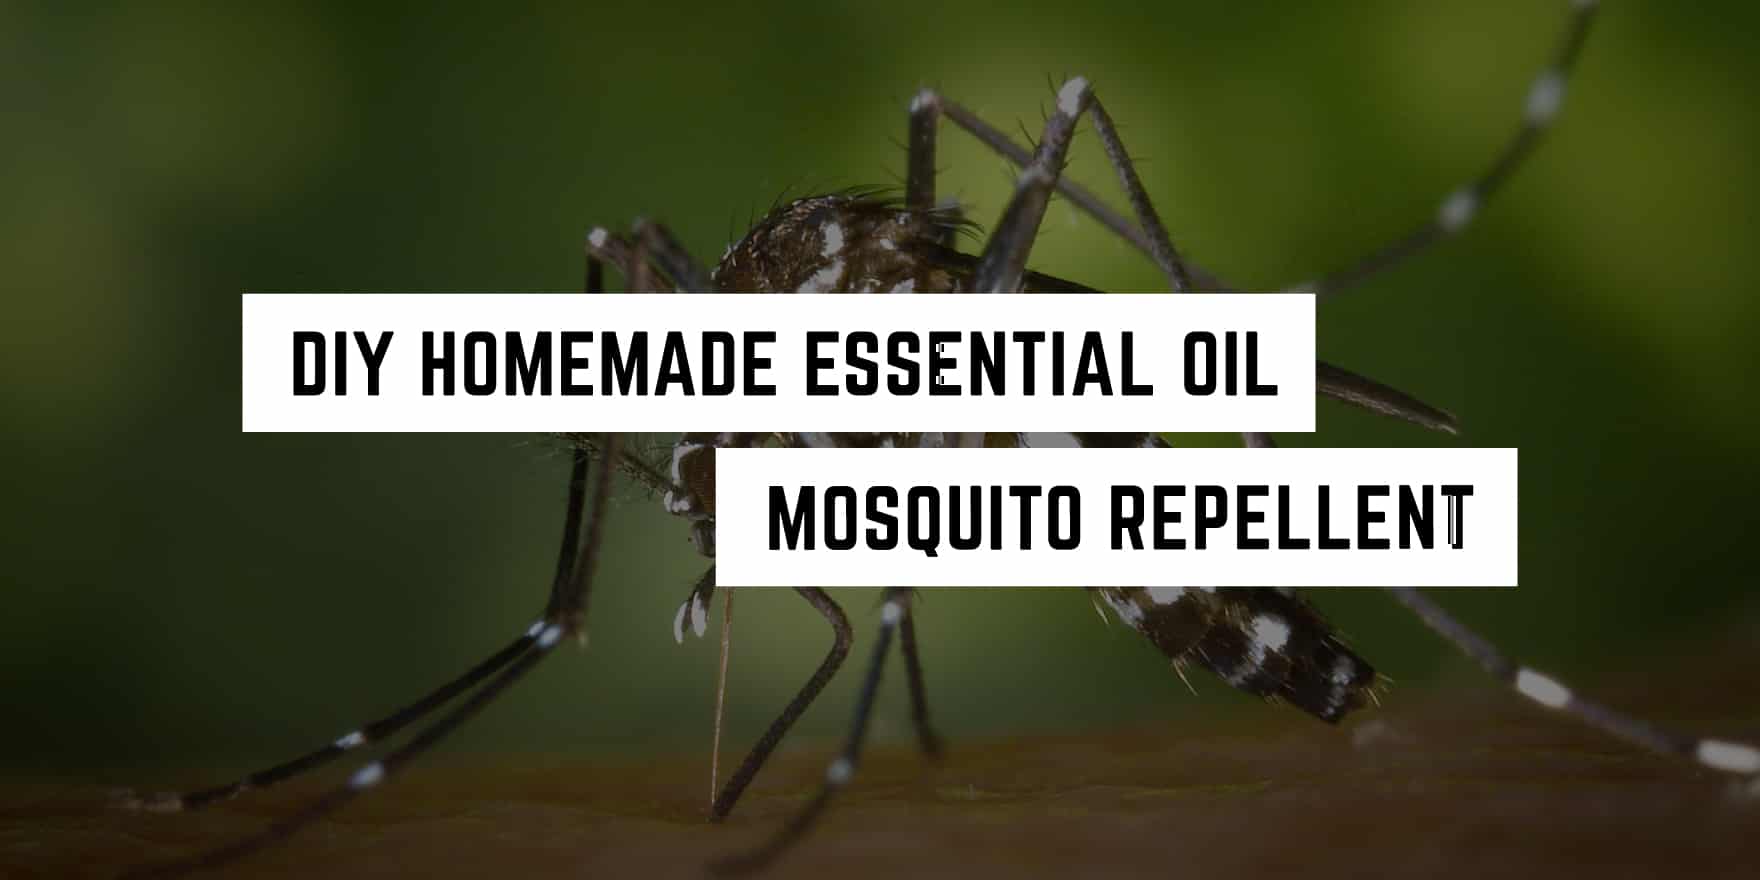 Diy homemade essential oil mosquito repellent from a metaphysical shop.